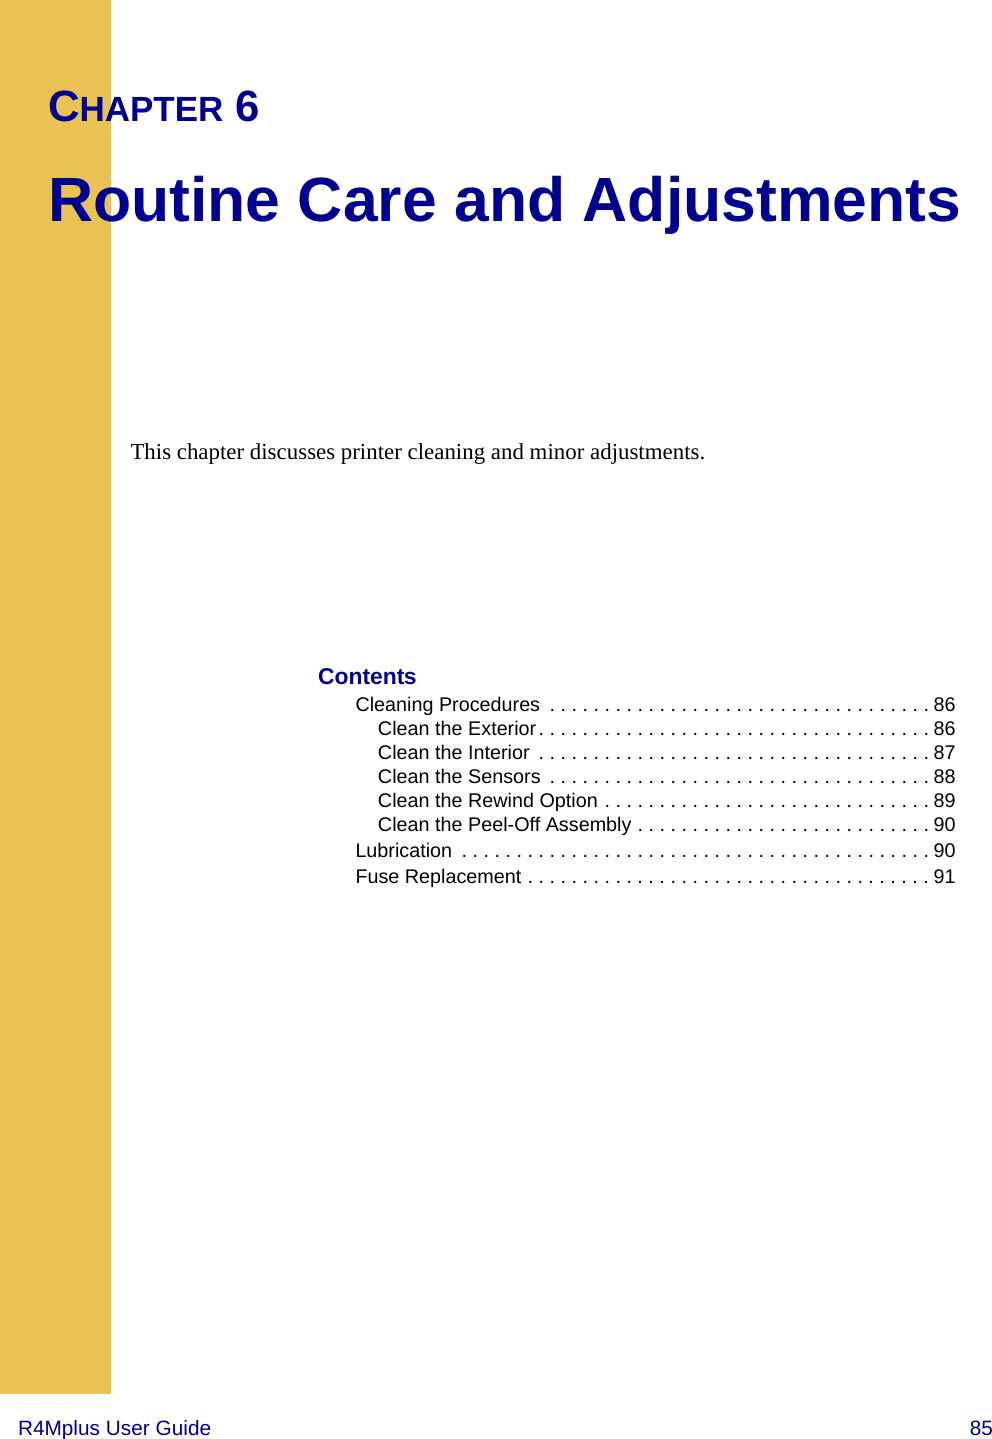 R4Mplus User Guide  85CHAPTER 6Routine Care and AdjustmentsThis chapter discusses printer cleaning and minor adjustments.ContentsCleaning Procedures  . . . . . . . . . . . . . . . . . . . . . . . . . . . . . . . . . . . 86Clean the Exterior. . . . . . . . . . . . . . . . . . . . . . . . . . . . . . . . . . . . 86Clean the Interior  . . . . . . . . . . . . . . . . . . . . . . . . . . . . . . . . . . . . 87Clean the Sensors  . . . . . . . . . . . . . . . . . . . . . . . . . . . . . . . . . . . 88Clean the Rewind Option . . . . . . . . . . . . . . . . . . . . . . . . . . . . . . 89Clean the Peel-Off Assembly . . . . . . . . . . . . . . . . . . . . . . . . . . . 90Lubrication  . . . . . . . . . . . . . . . . . . . . . . . . . . . . . . . . . . . . . . . . . . . 90Fuse Replacement . . . . . . . . . . . . . . . . . . . . . . . . . . . . . . . . . . . . . 91